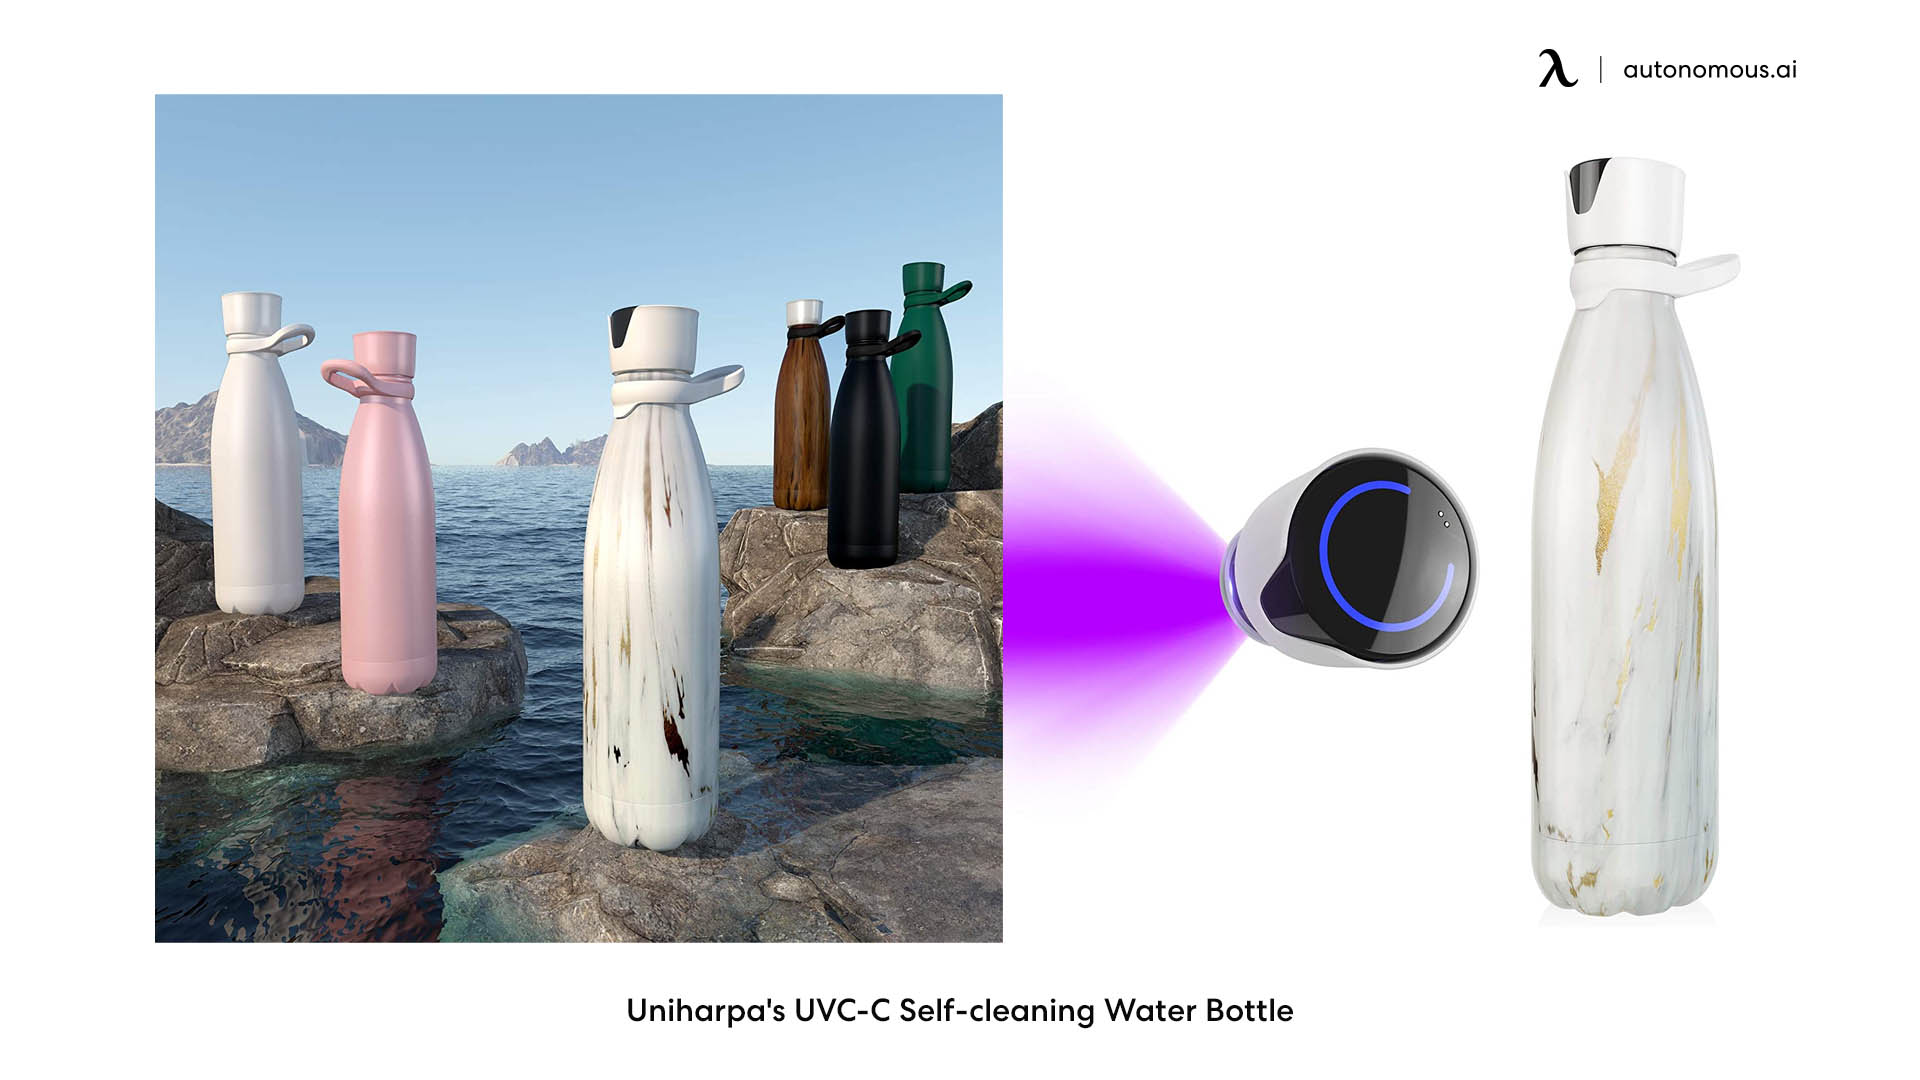 Uniharpa's UVC-C Self-cleaning Water Bottle